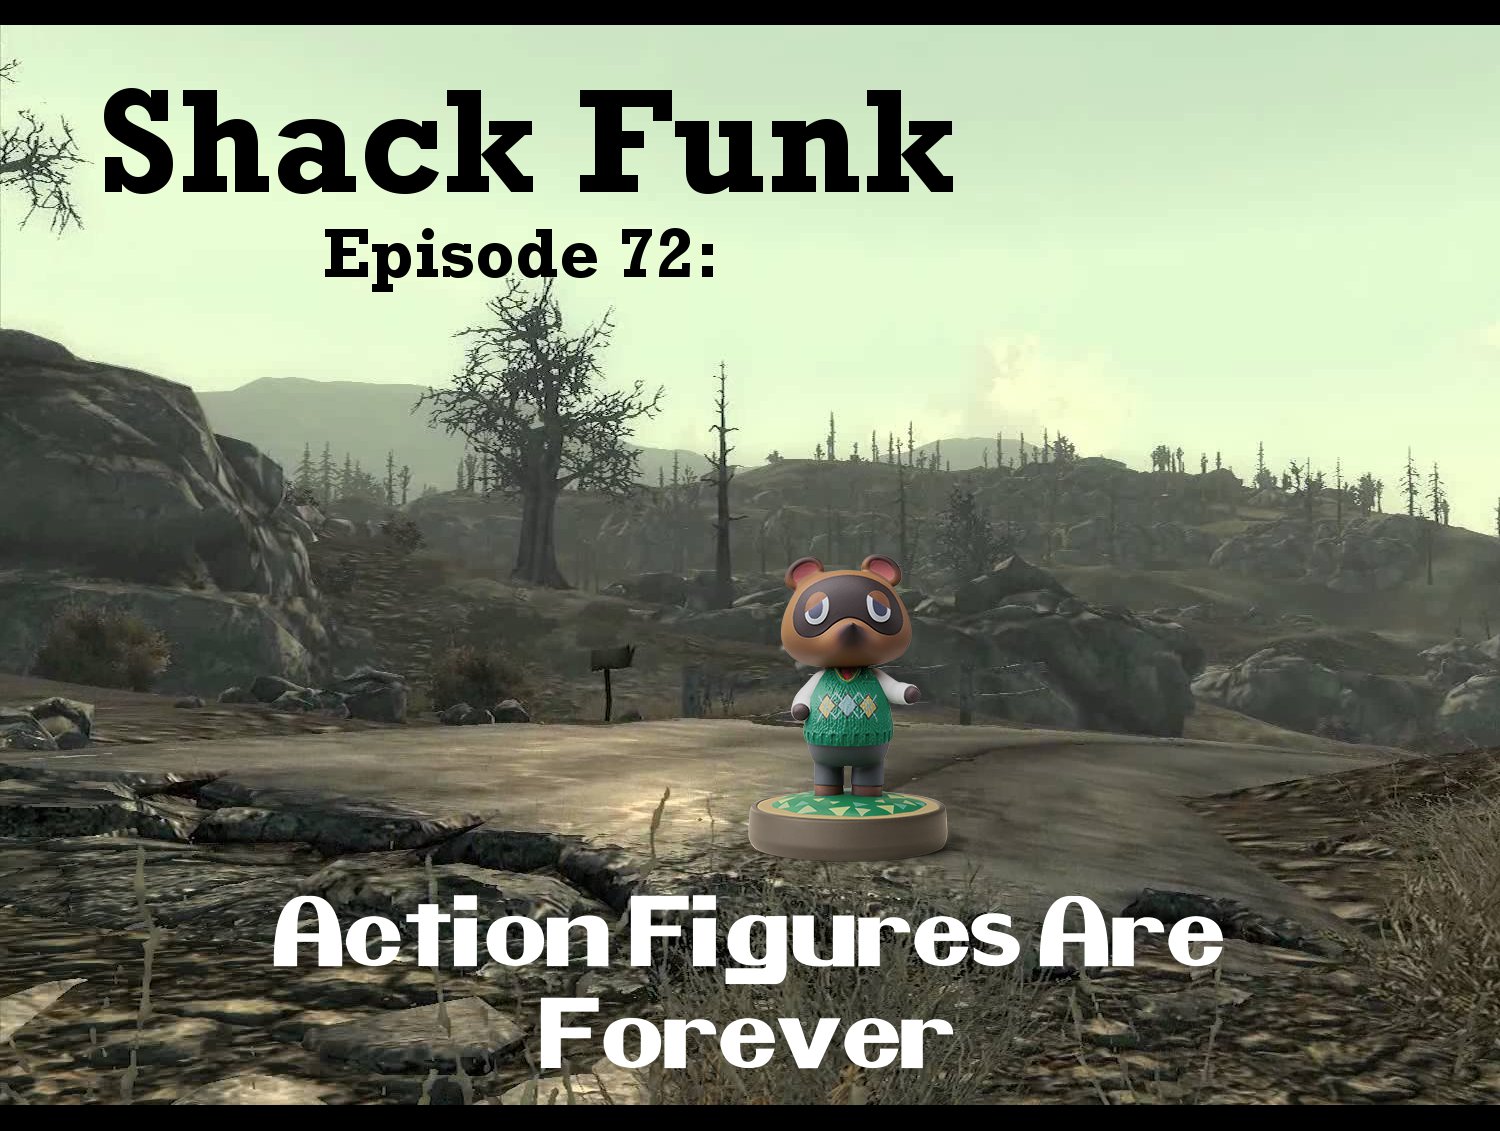 Shack Funk 72 - Action Figures Are Forever